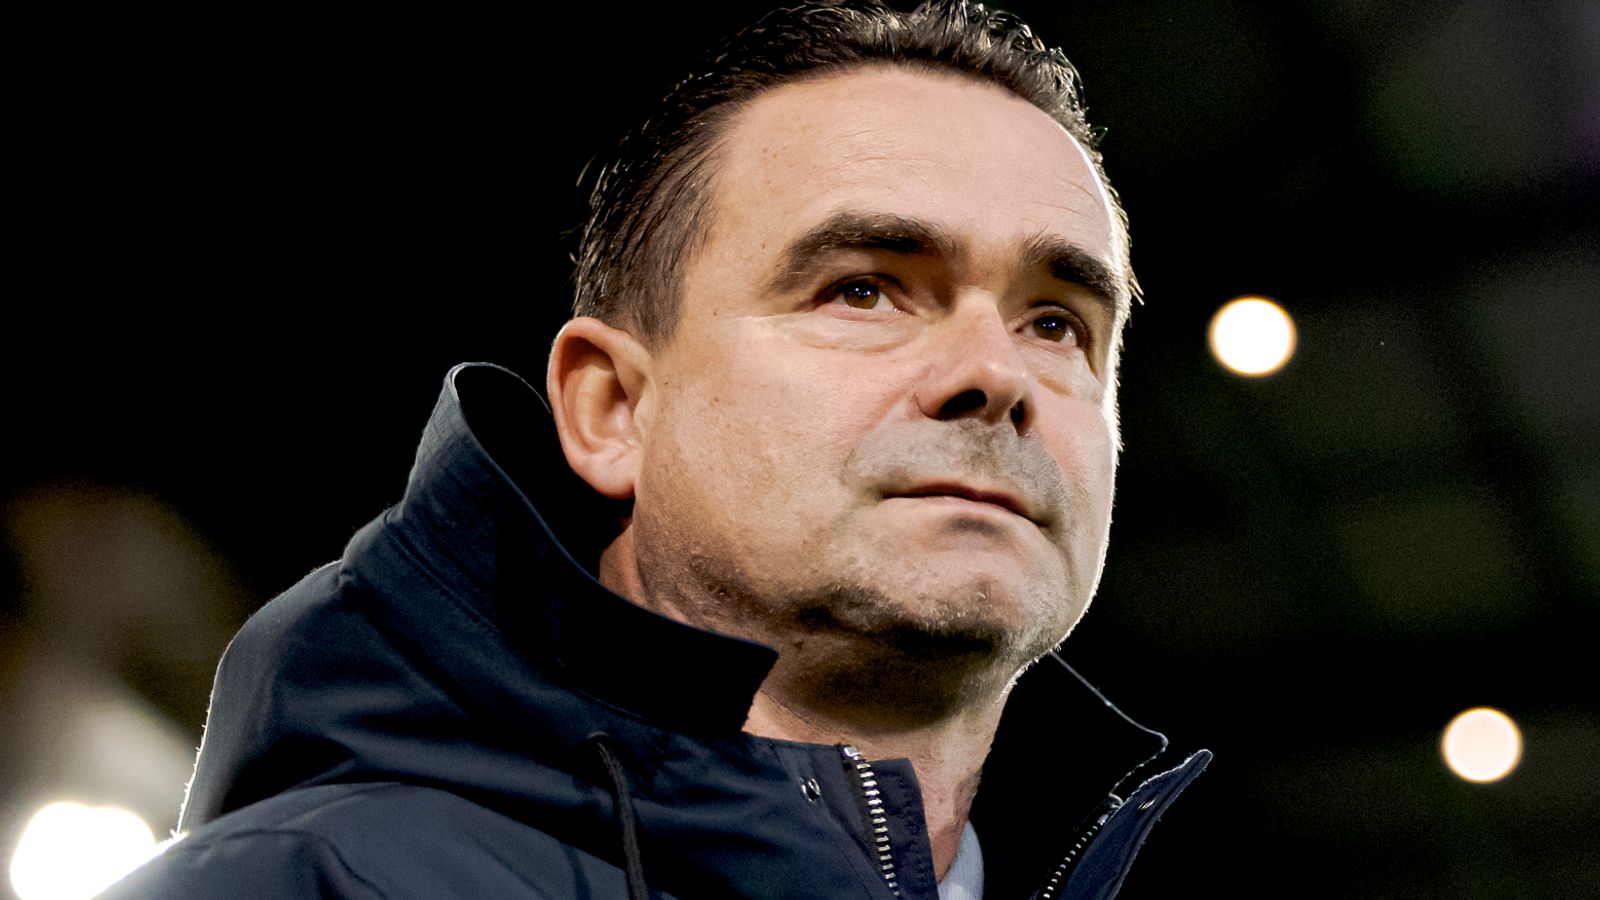 Ajax: Marc Overmars quits after sending ‘inappropriate messages’